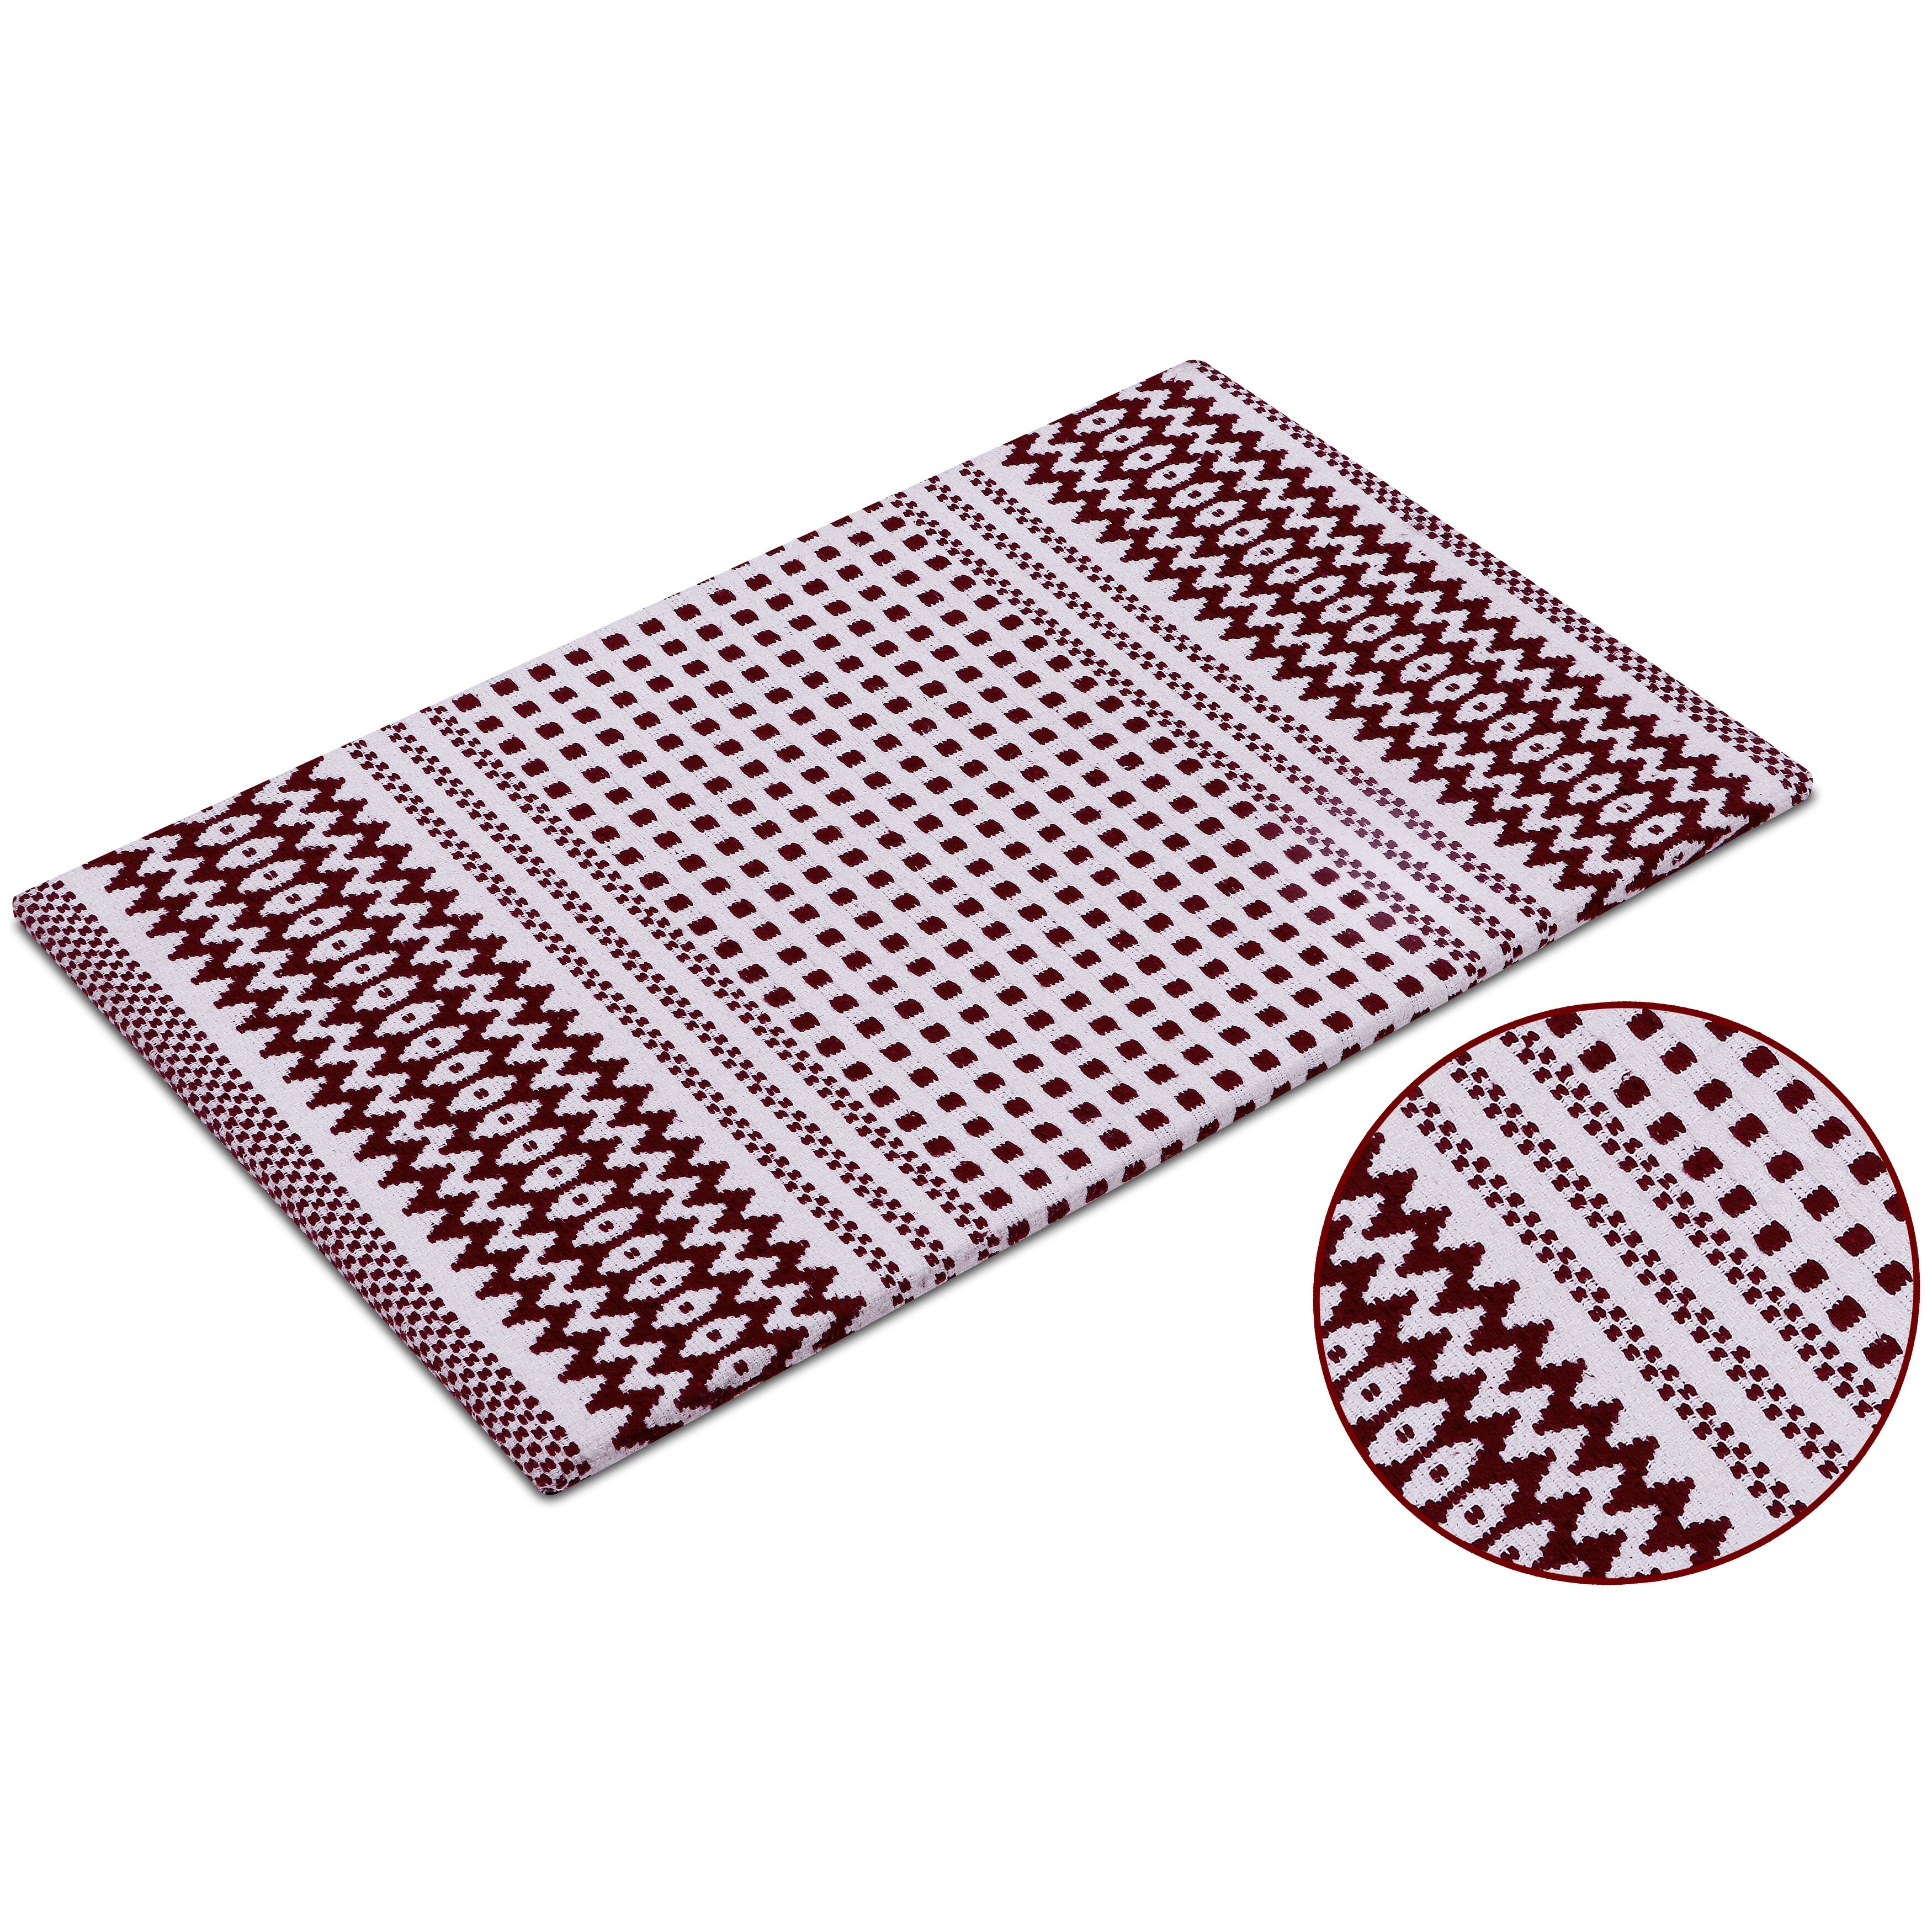 https://ak1.ostkcdn.com/images/products/is/images/direct/7a57f70485b67511842c562f941fb25117dd254c/Kitchen-Mat-Cushioned-Anti-Fatigue-Kitchen-Rug%2C-Non-Slip-Mats-Comfort-Foam-Rug-for-Kitchen%2C-Office%2C-Sink%2C-Laundry---18%27%27x30%27%27.jpg